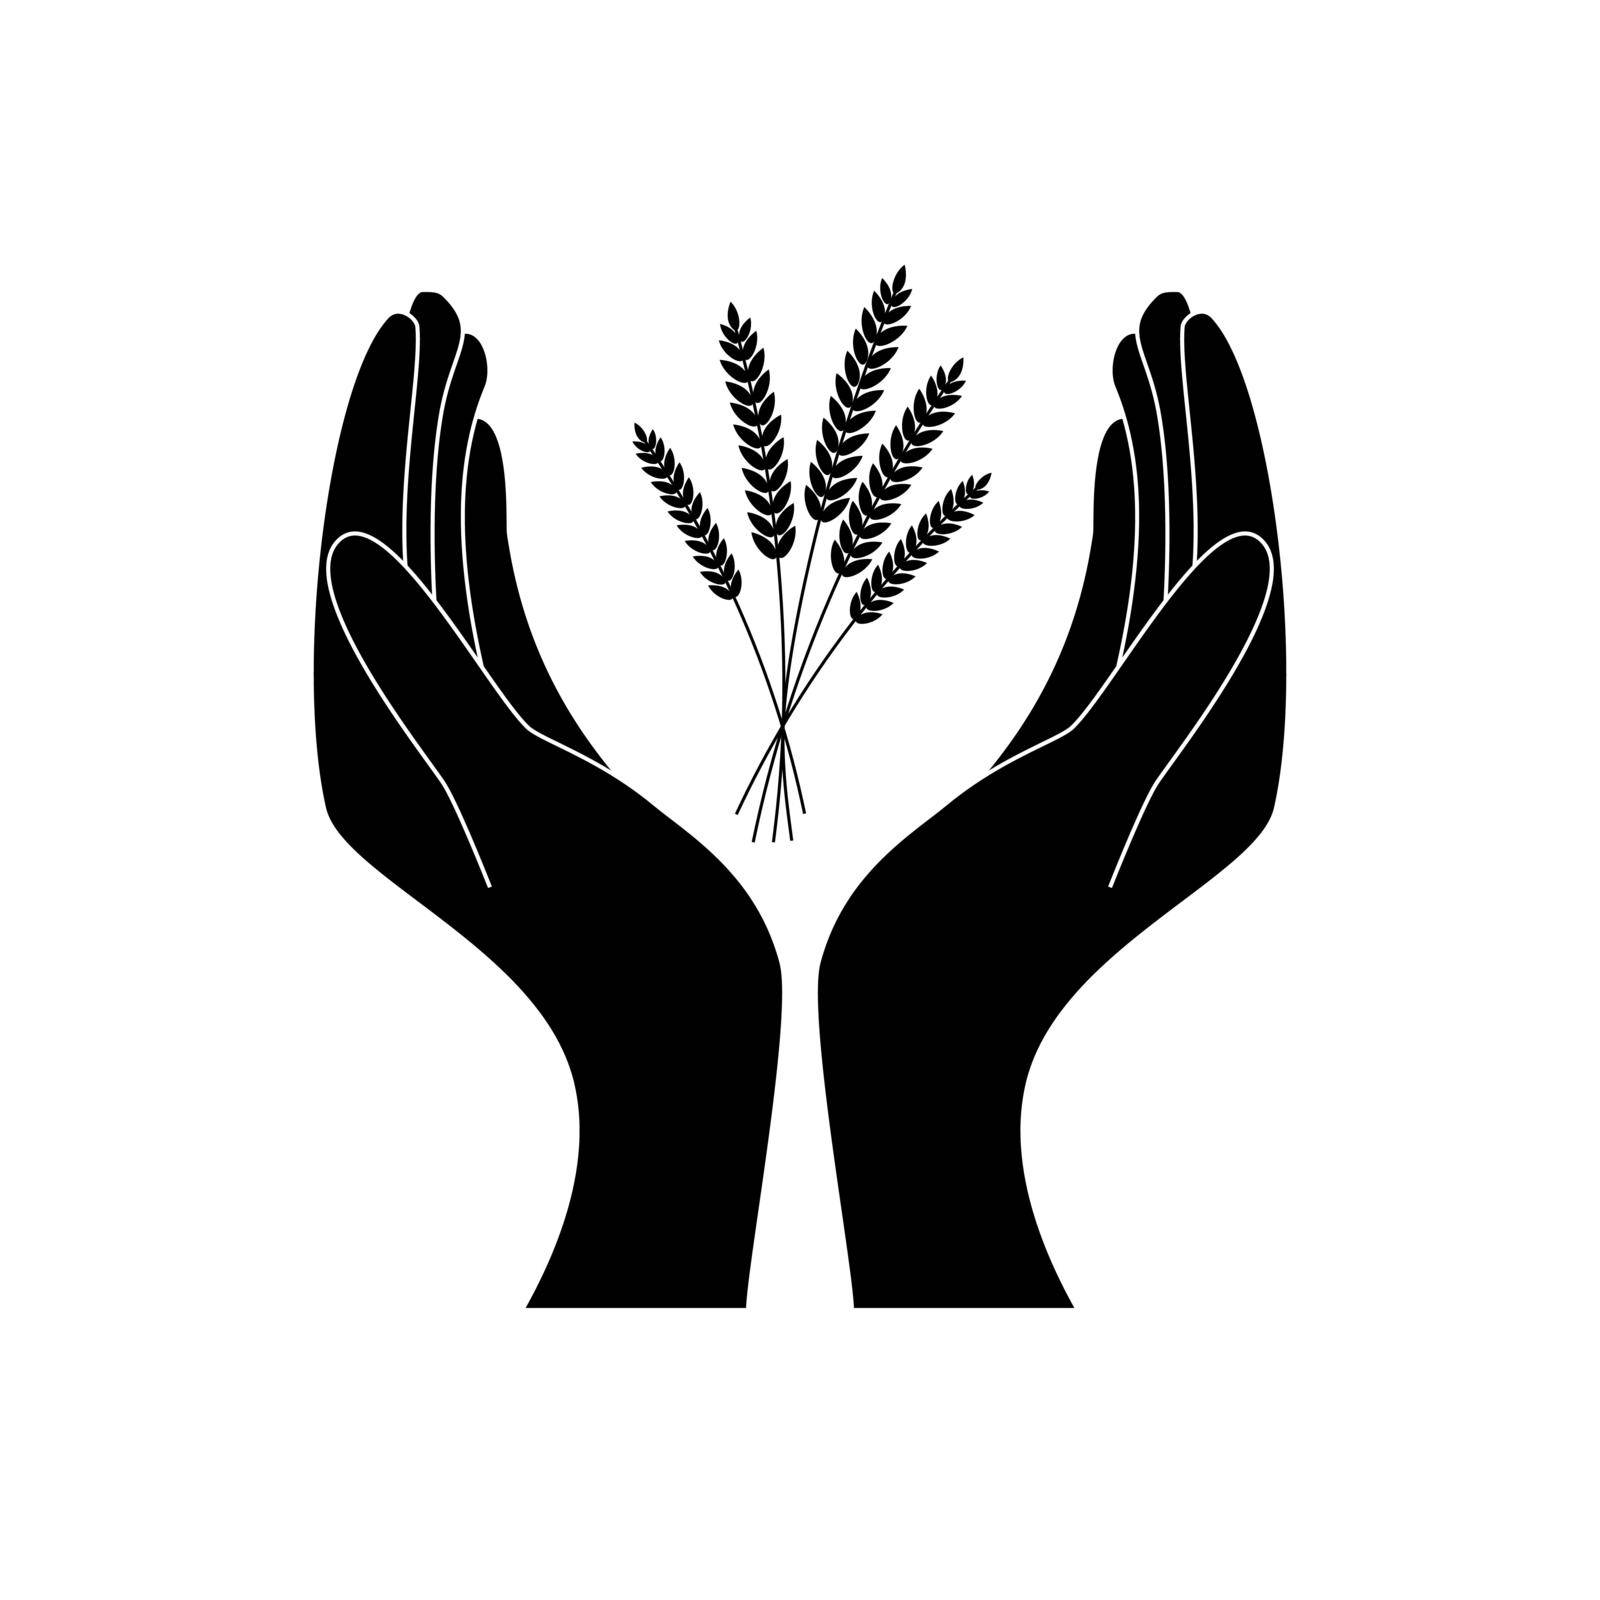 Man holding in hand wheat ear, black icon isolated on white background. Wheat spike holding farmer, peasant. Development agriculture, farming. Symbol of harvest. Vector illustration silhouette design. against hunger by juliet_summertime